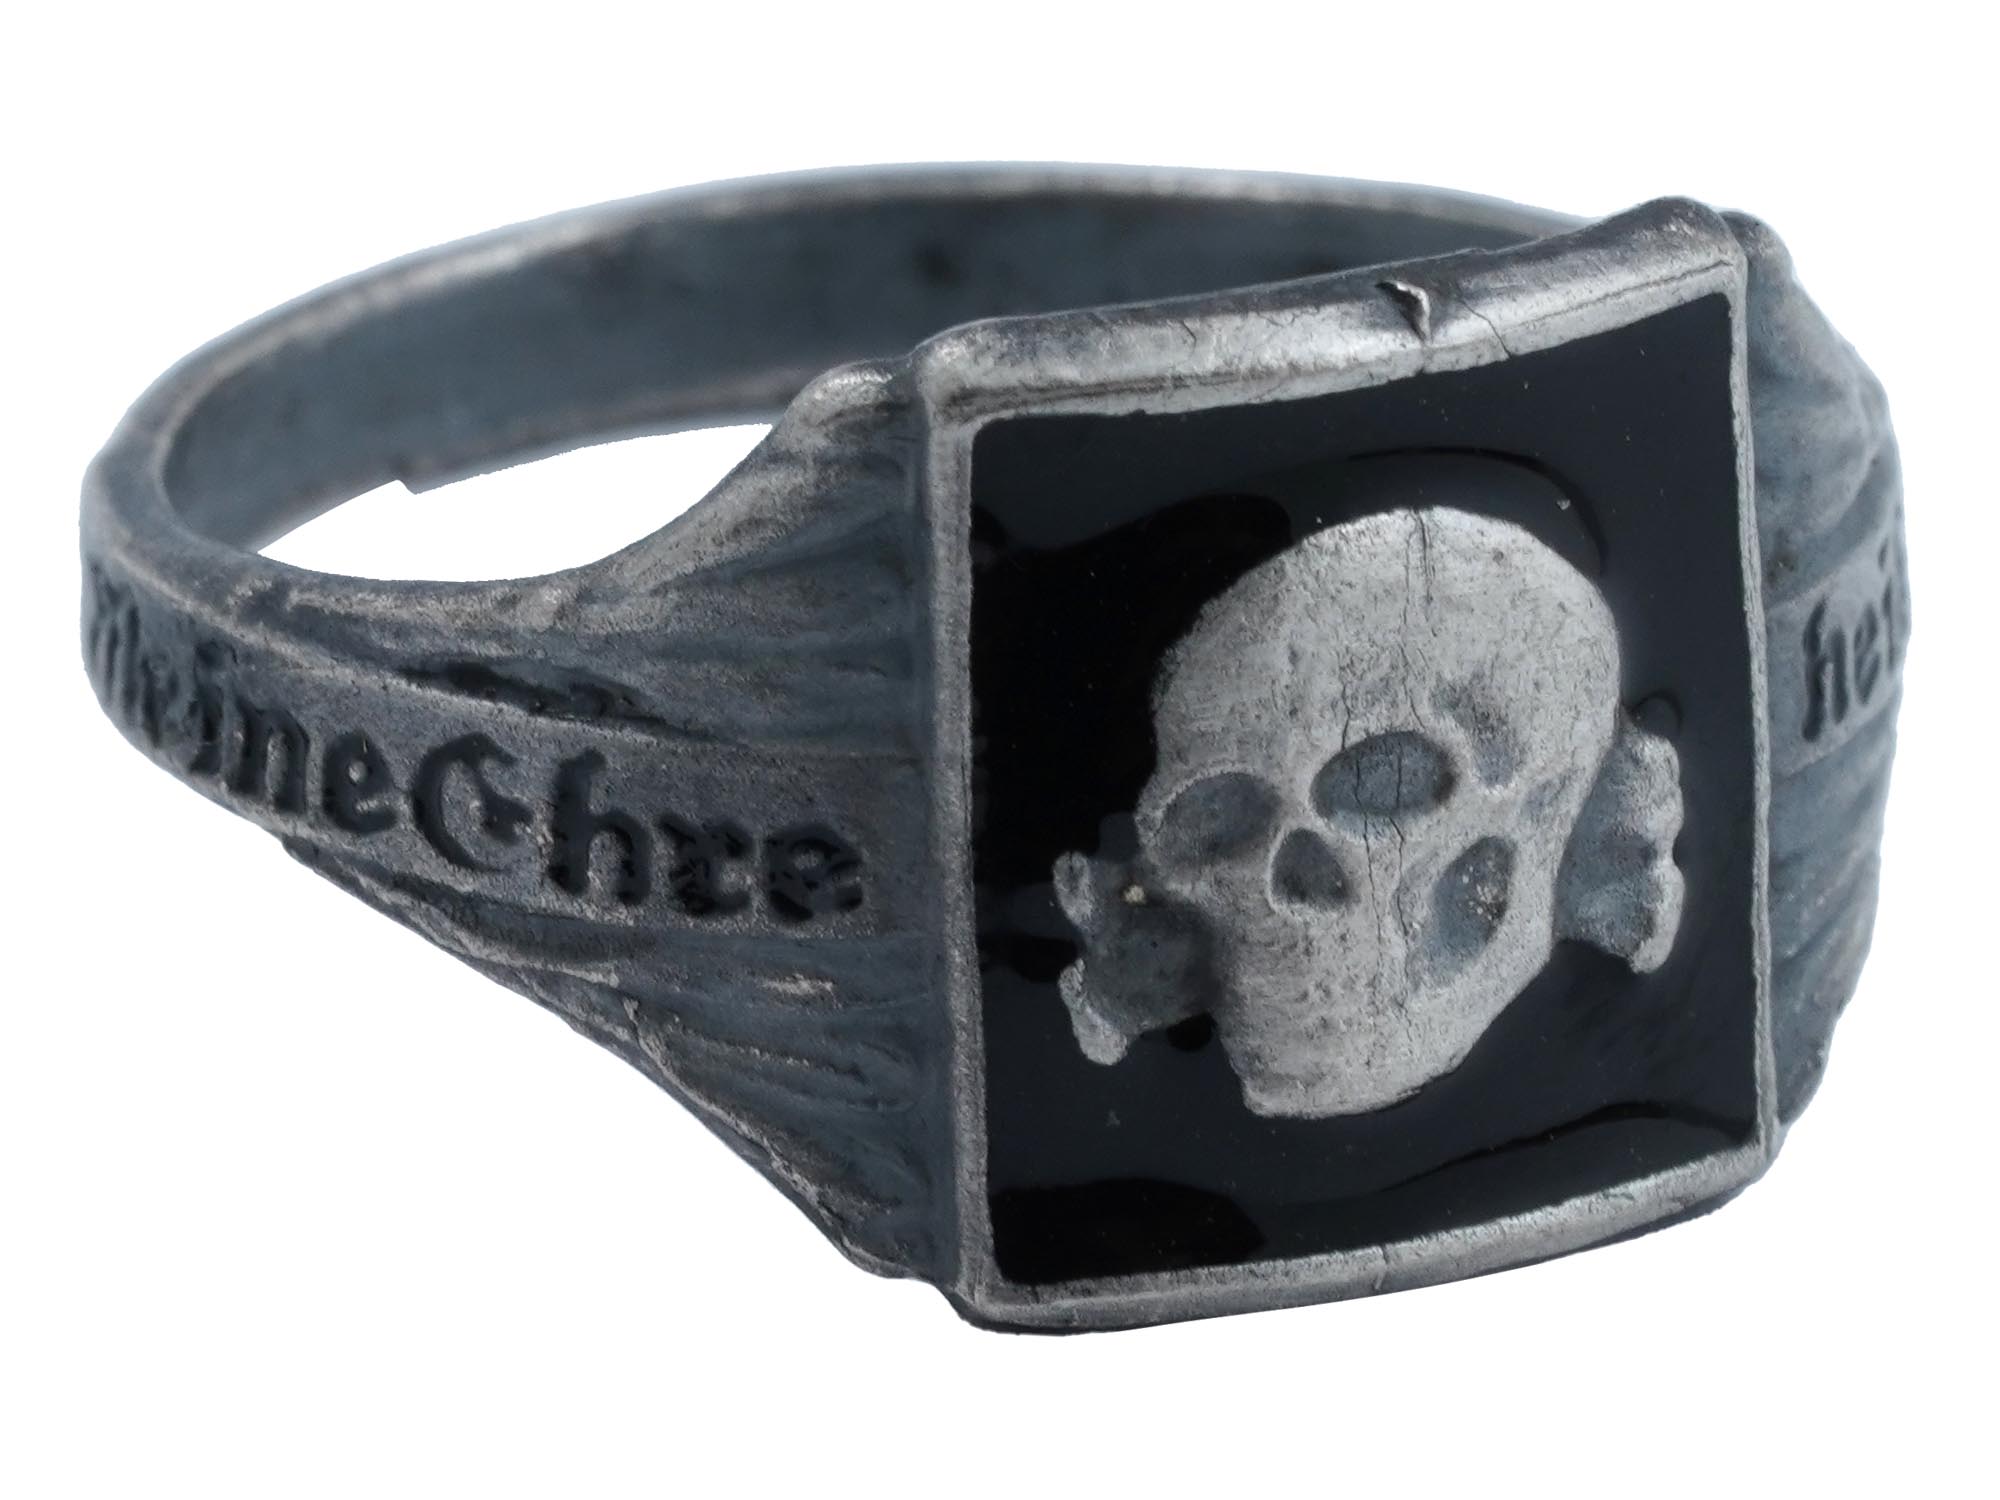 GERMAN WWII TYPE WAFFEN SS DIVISION TOTENKOPF SILVER RING PIC-1